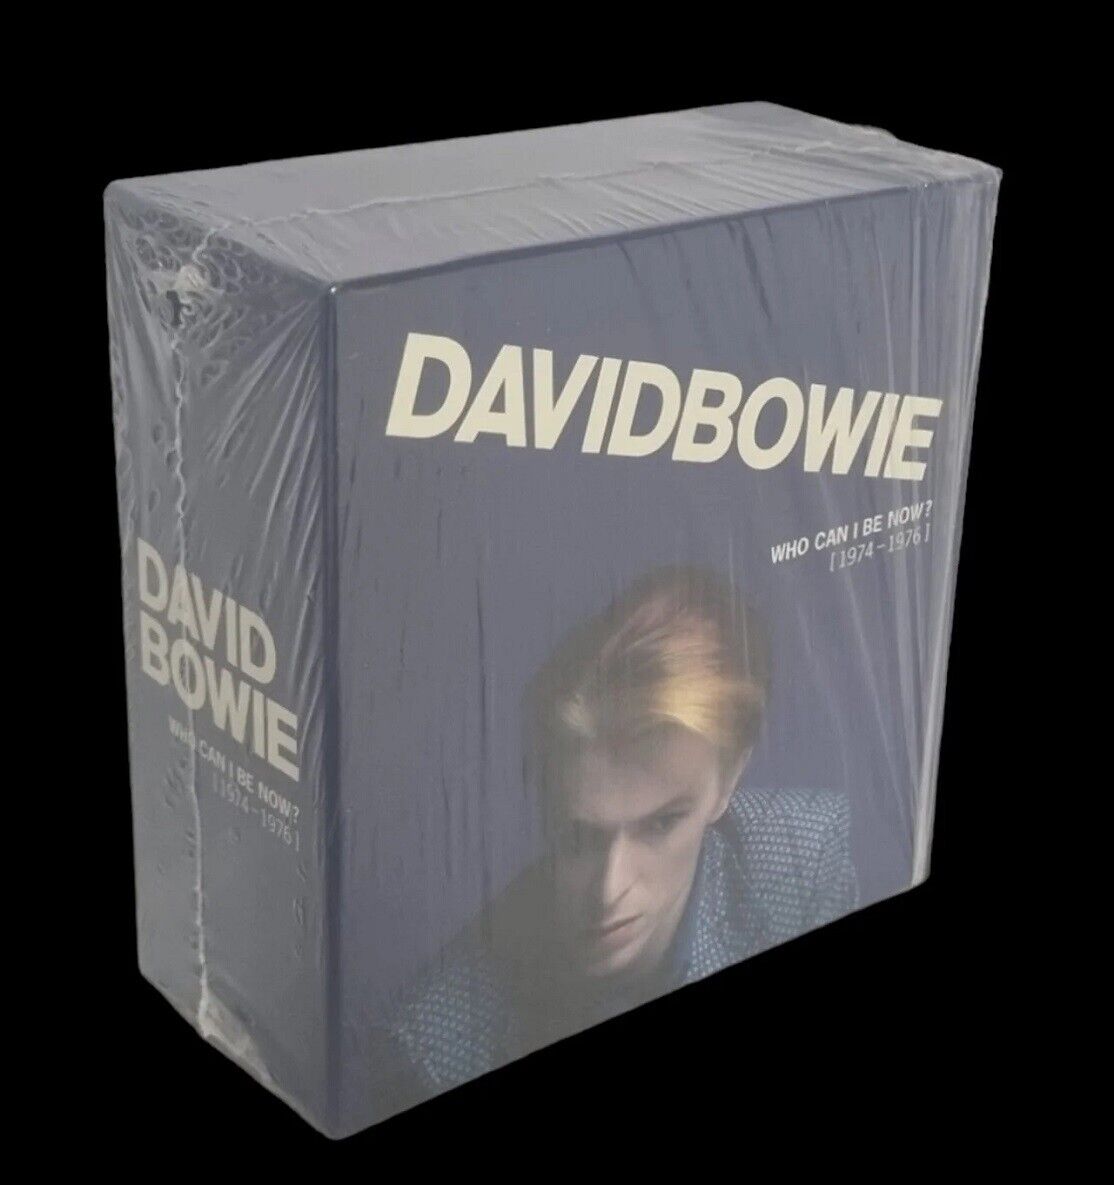 Who Can I Be Now? 1974 To 1976 David Bowie CD NEW SEALED Box Set  